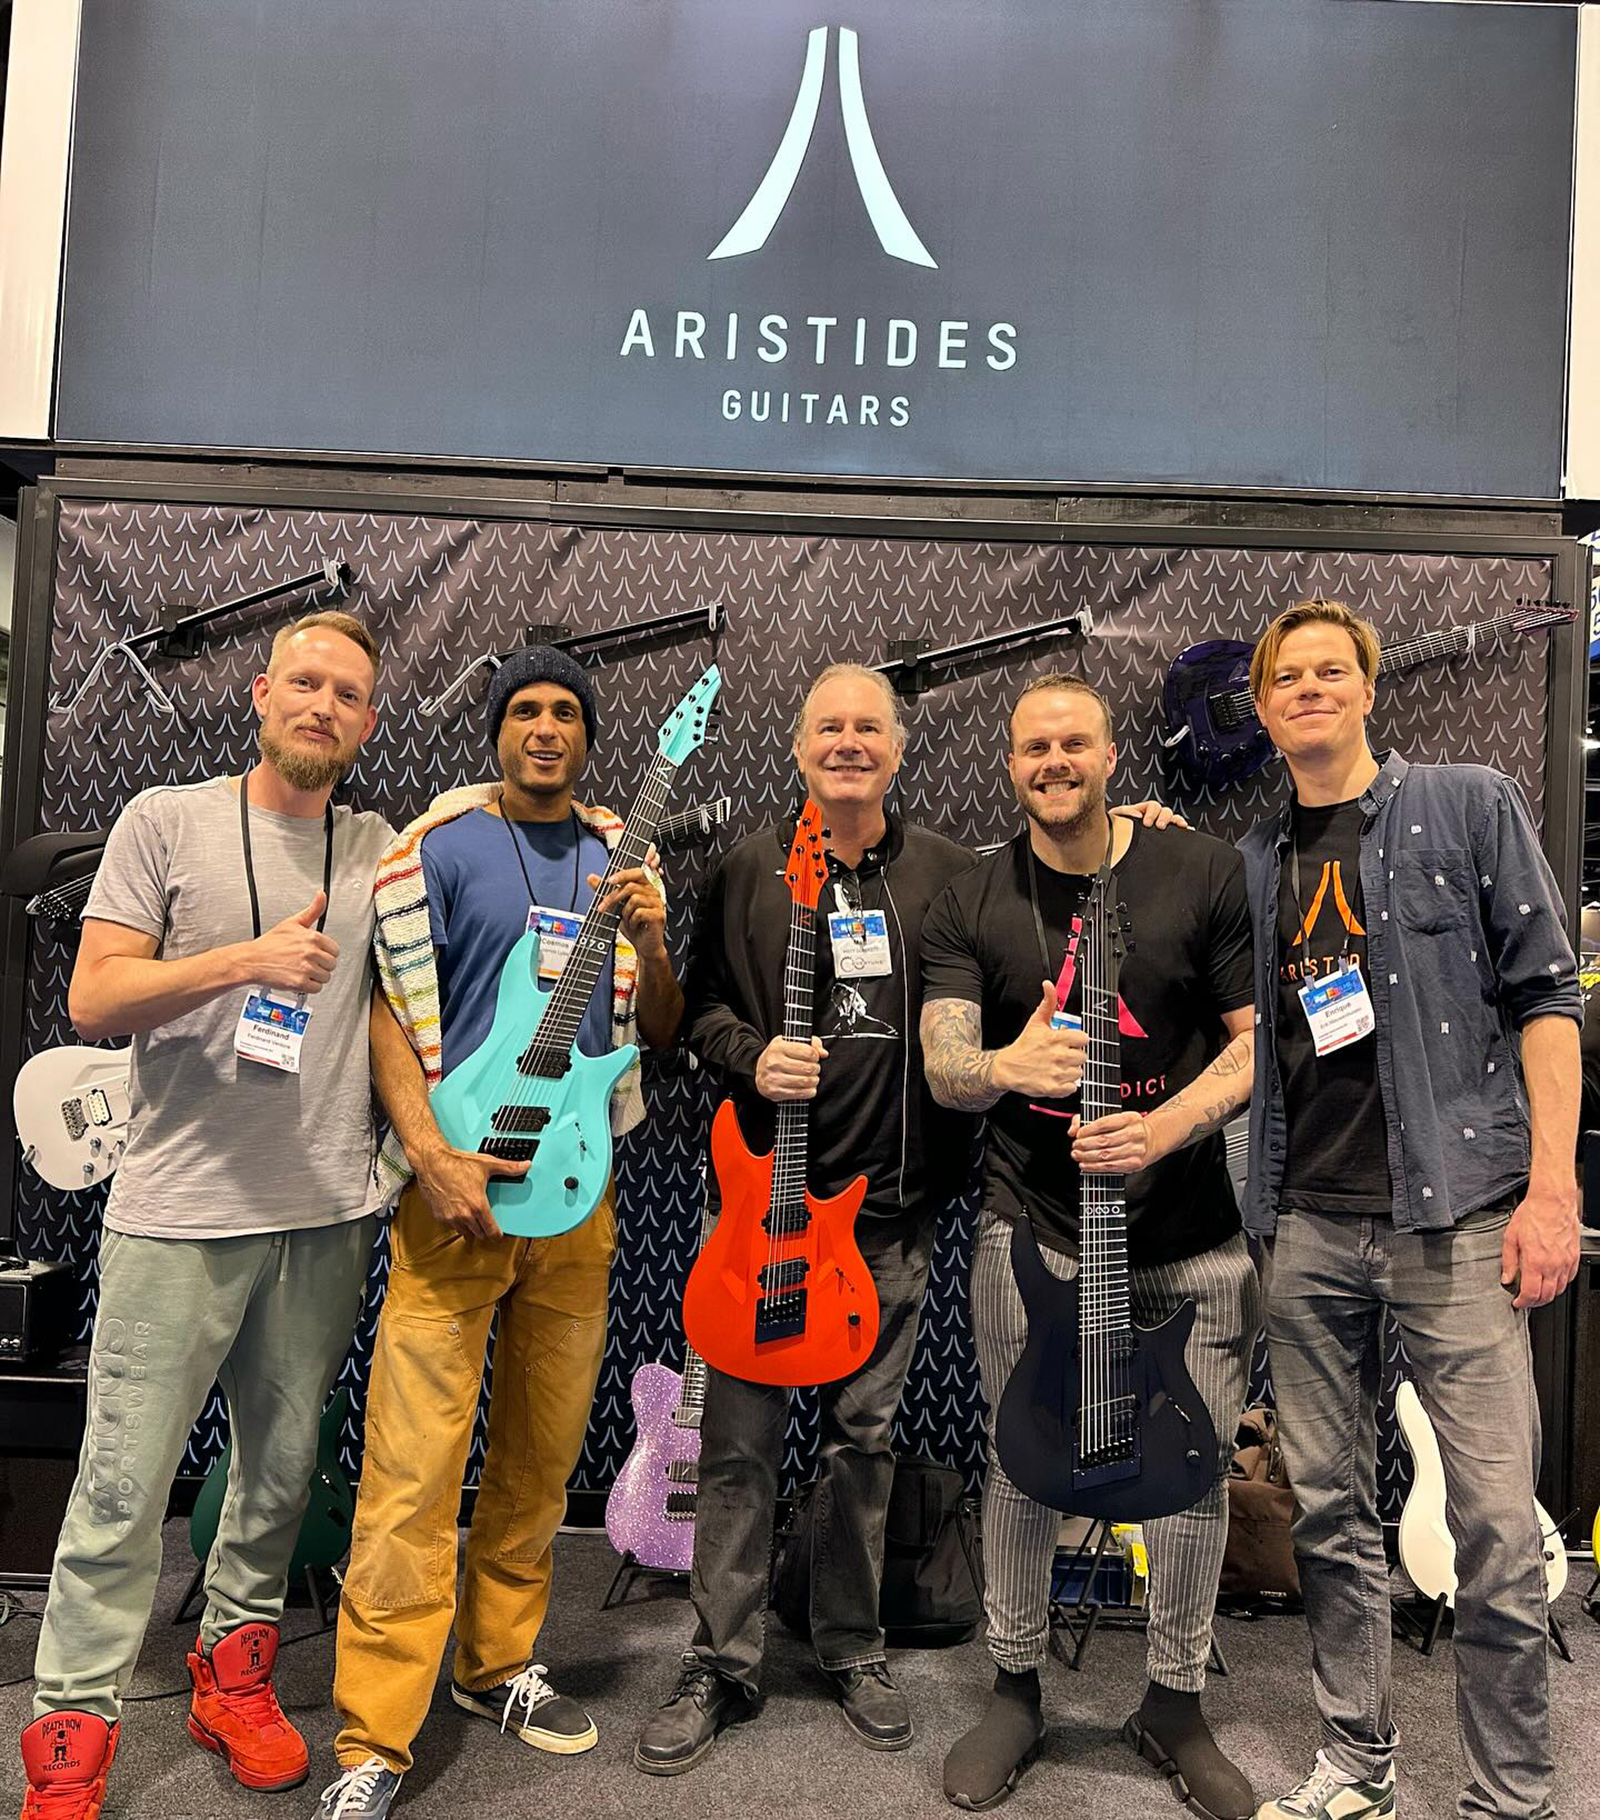 EverTune's Matt Blackett and Cosmos Lyles hang with the Aristides crew and their instruments with multiscale EverTune bridges.